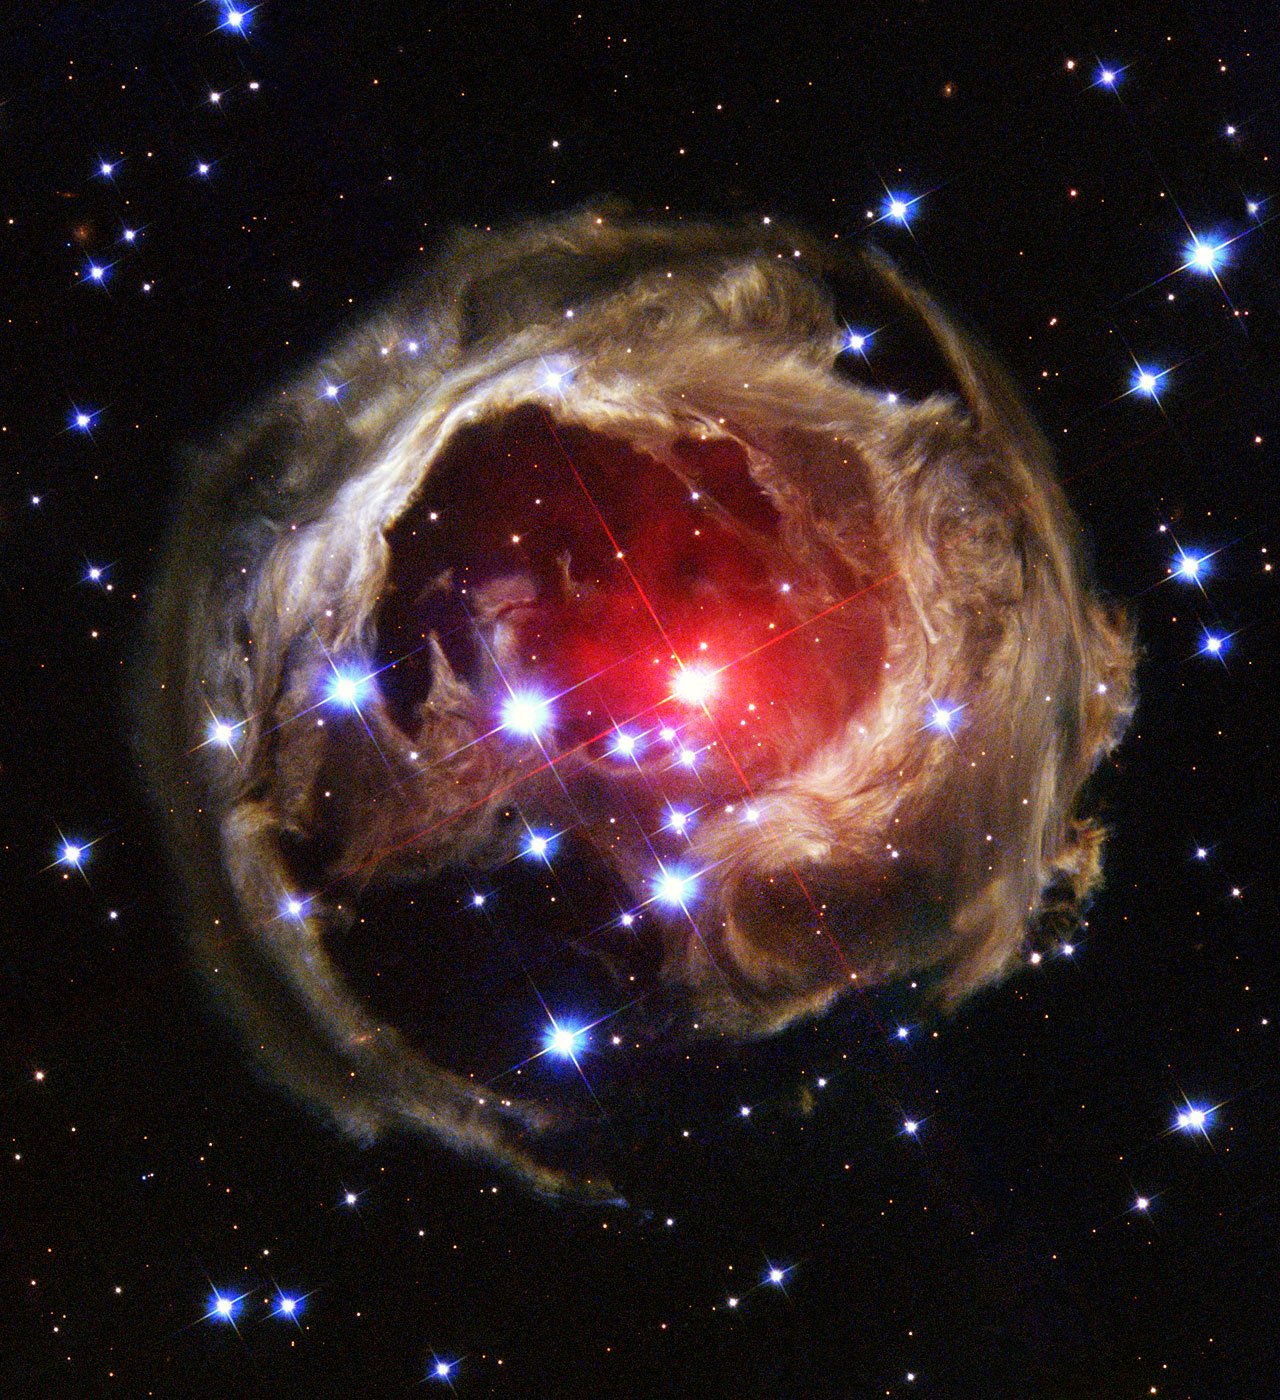 At Least You’re Not Imploding- Time Lapse of a Dying Star